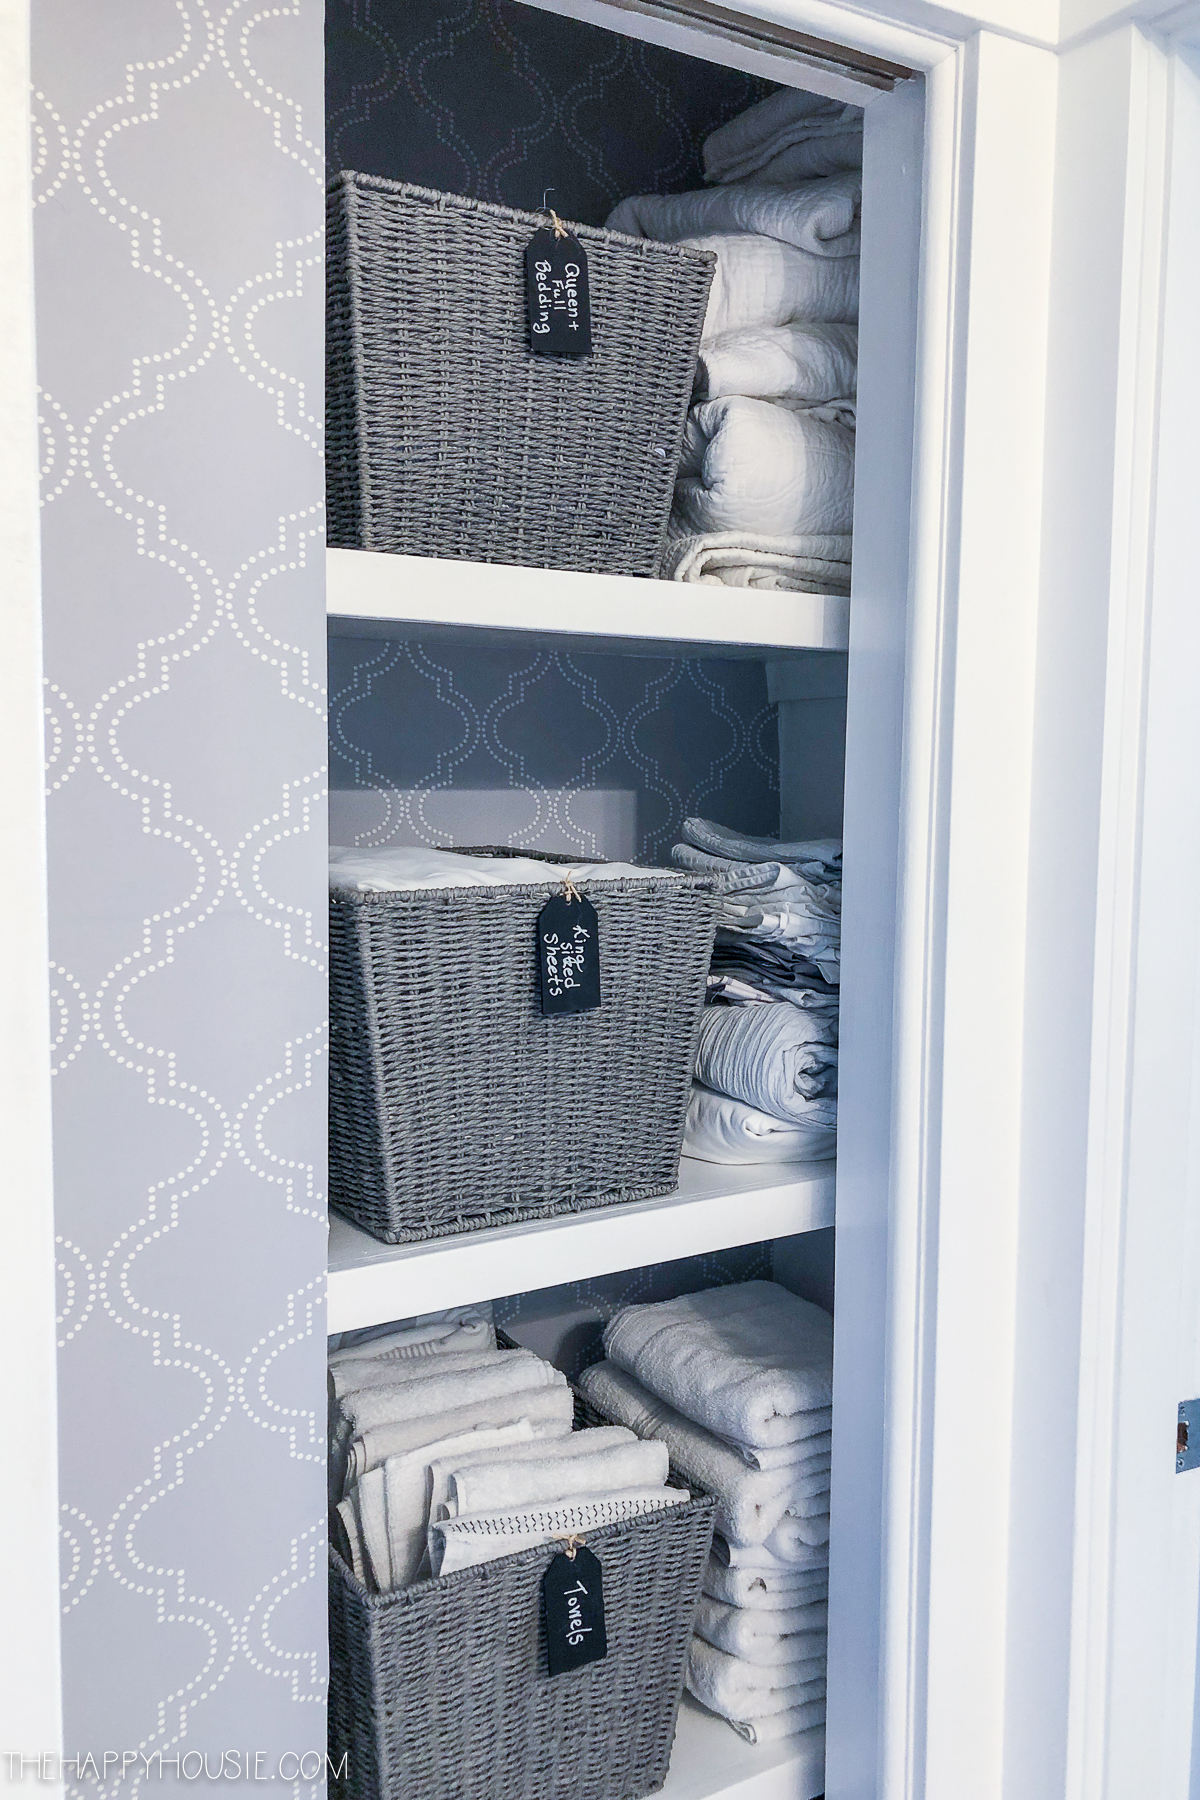 https://www.thehappyhousie.com/wp-content/uploads/2020/02/how-to-completely-organize-your-linen-closet-10-Week-Organizing-Challenge-at-the-happy-housie-15.jpg